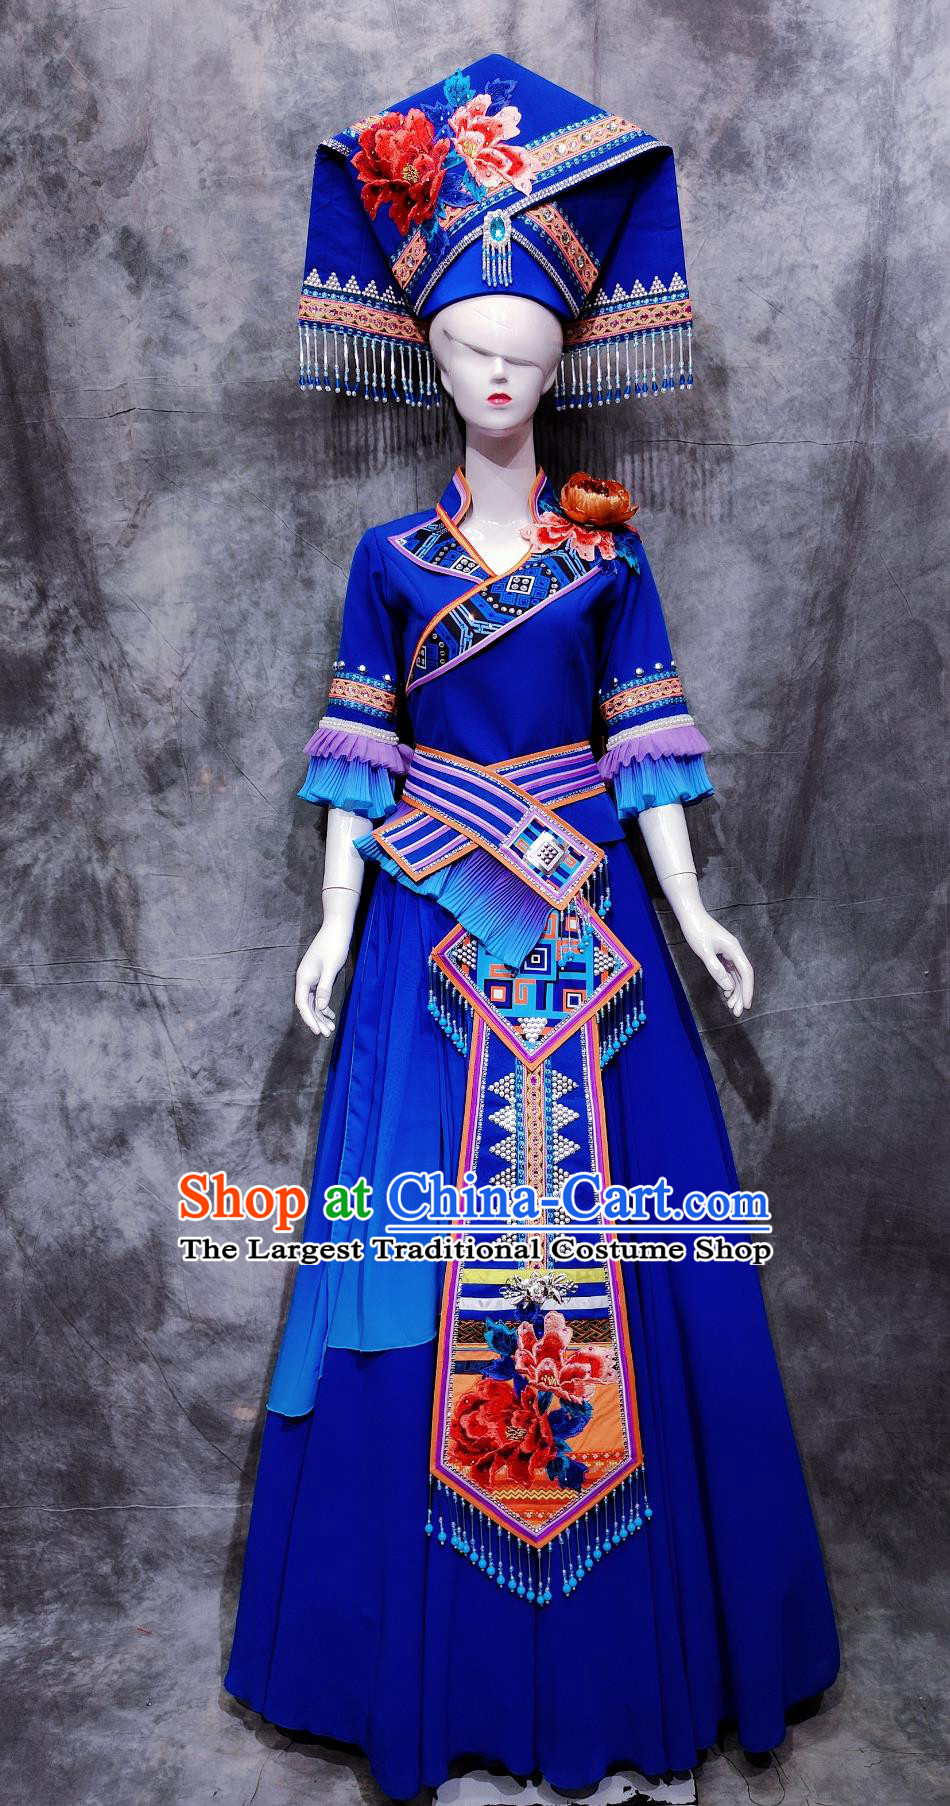 Traditional Guangxi Travel March 3rd Festival Attire Chinese Ethnic Dance Blue Dress Costume China Zhuang National Minority Woman Clothing